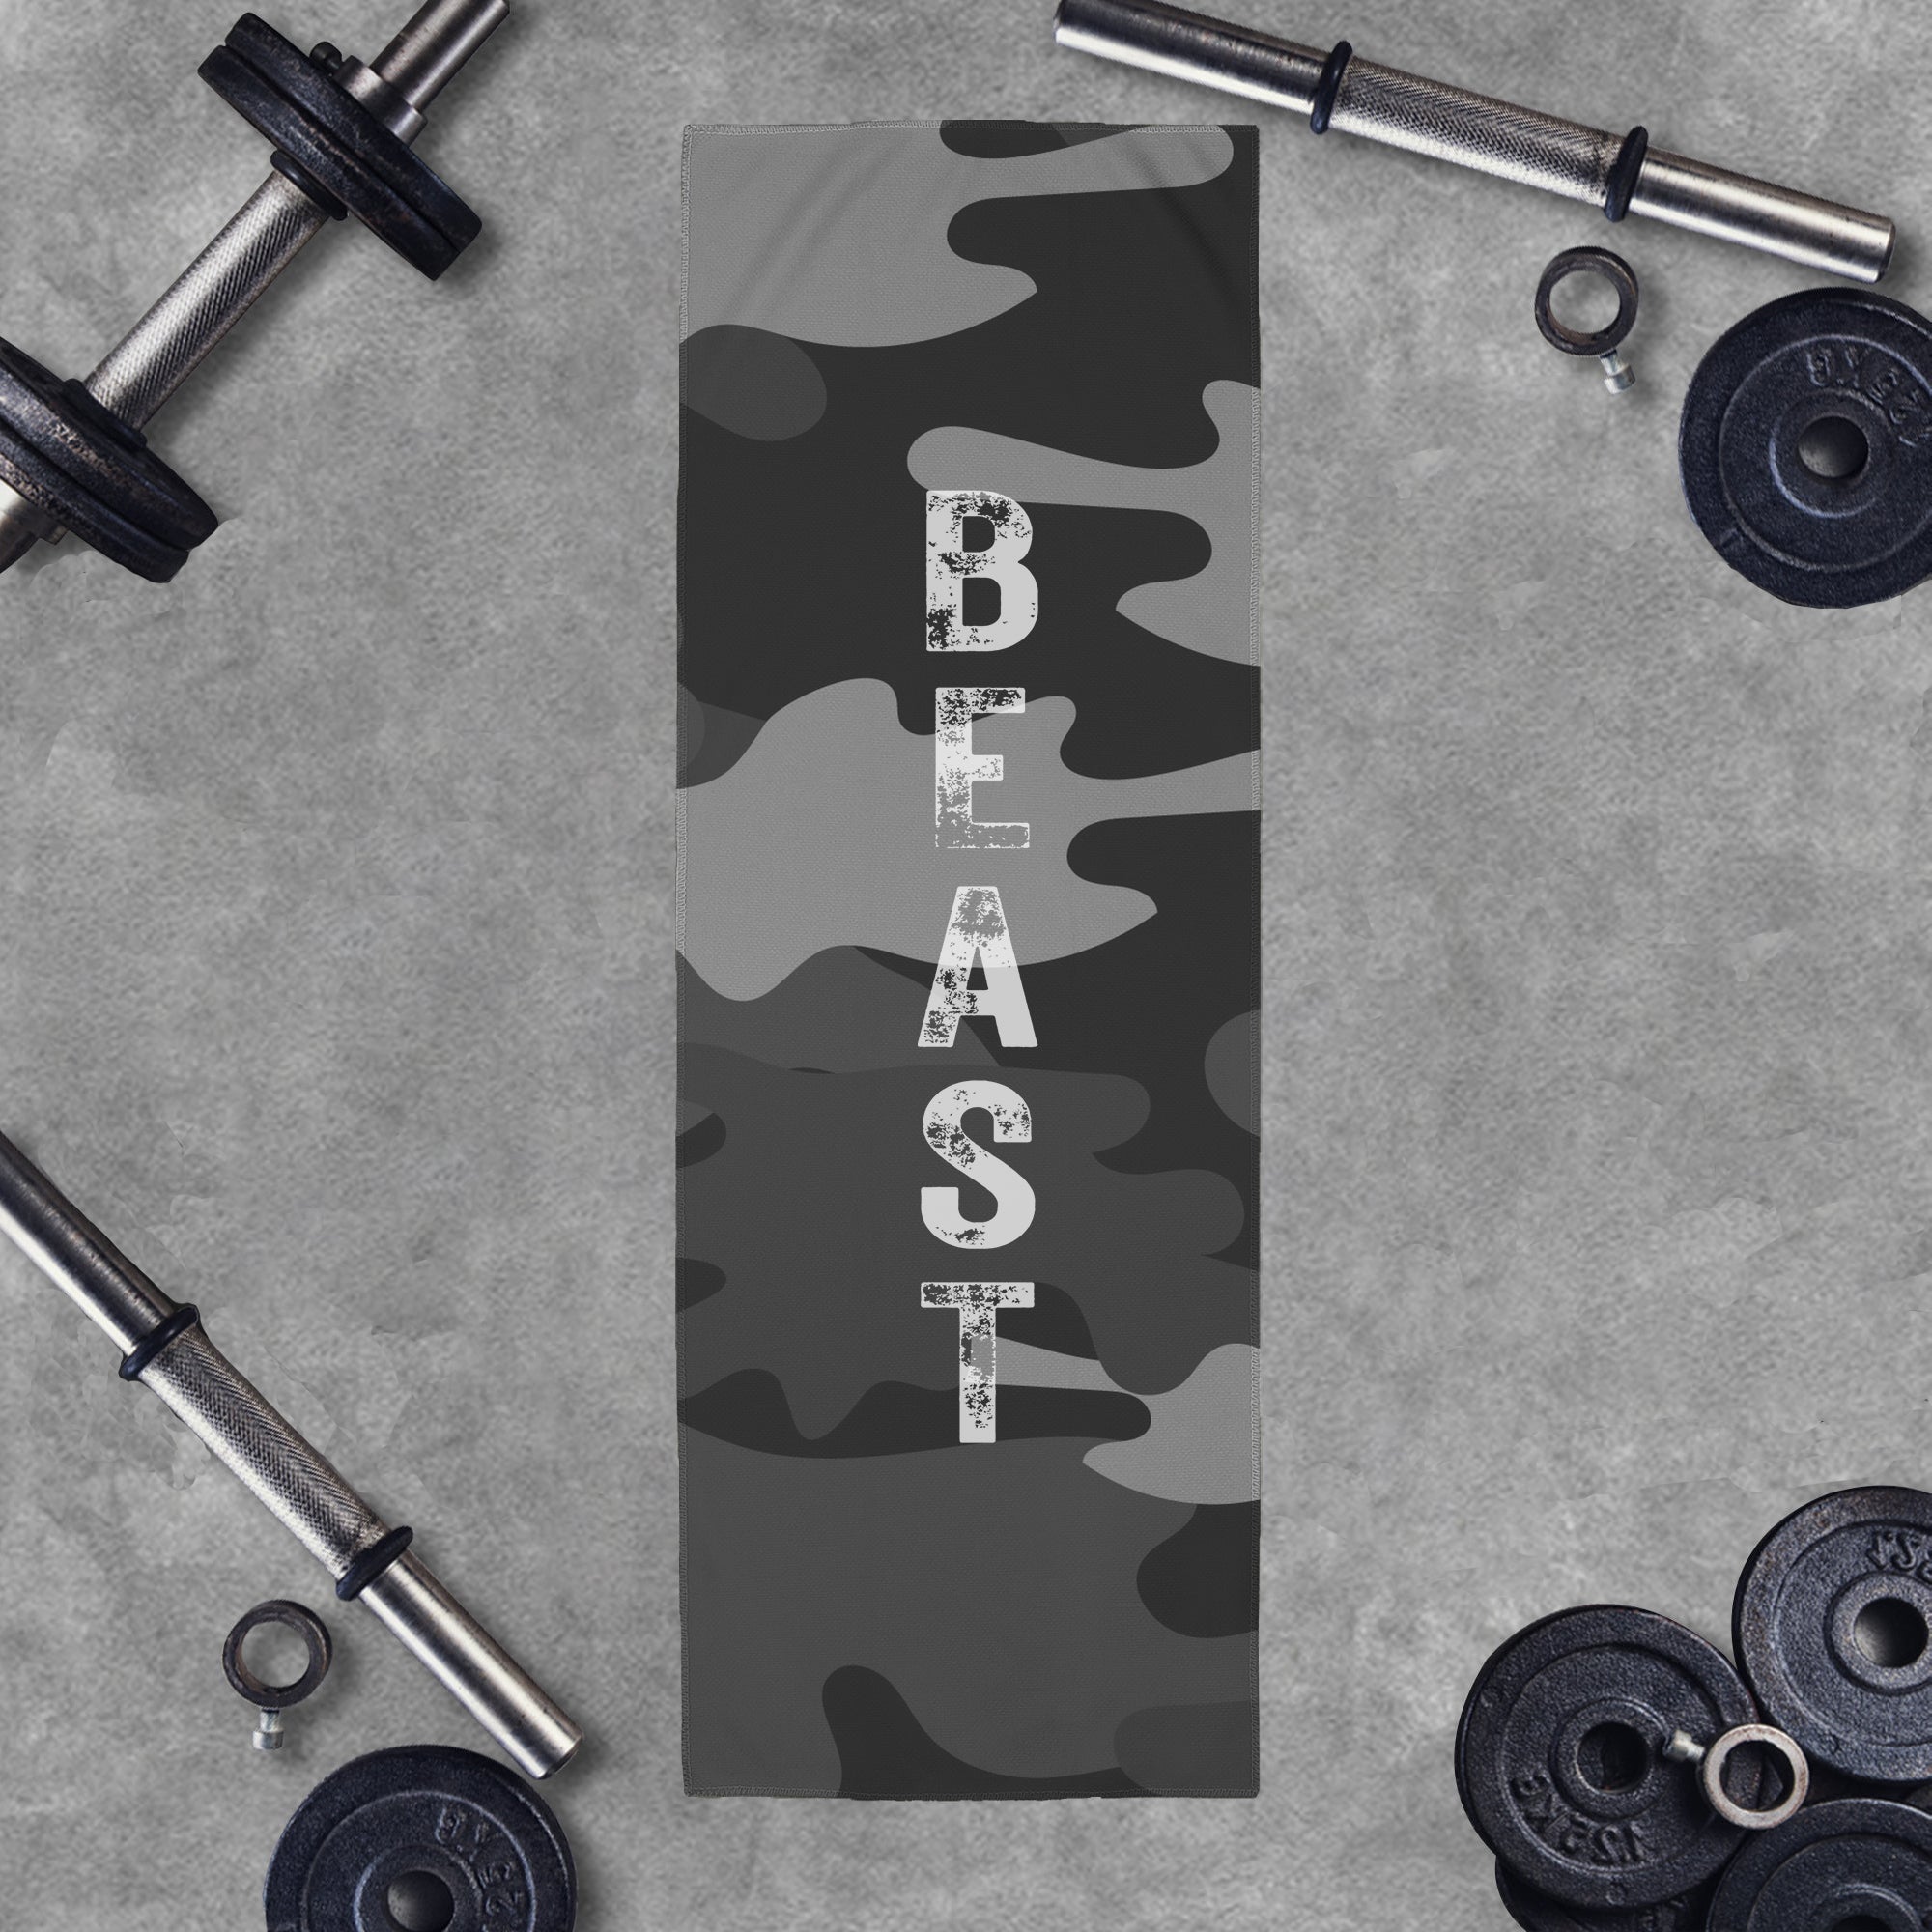 Camouflage Beast Graphic Workout Cooling Towel